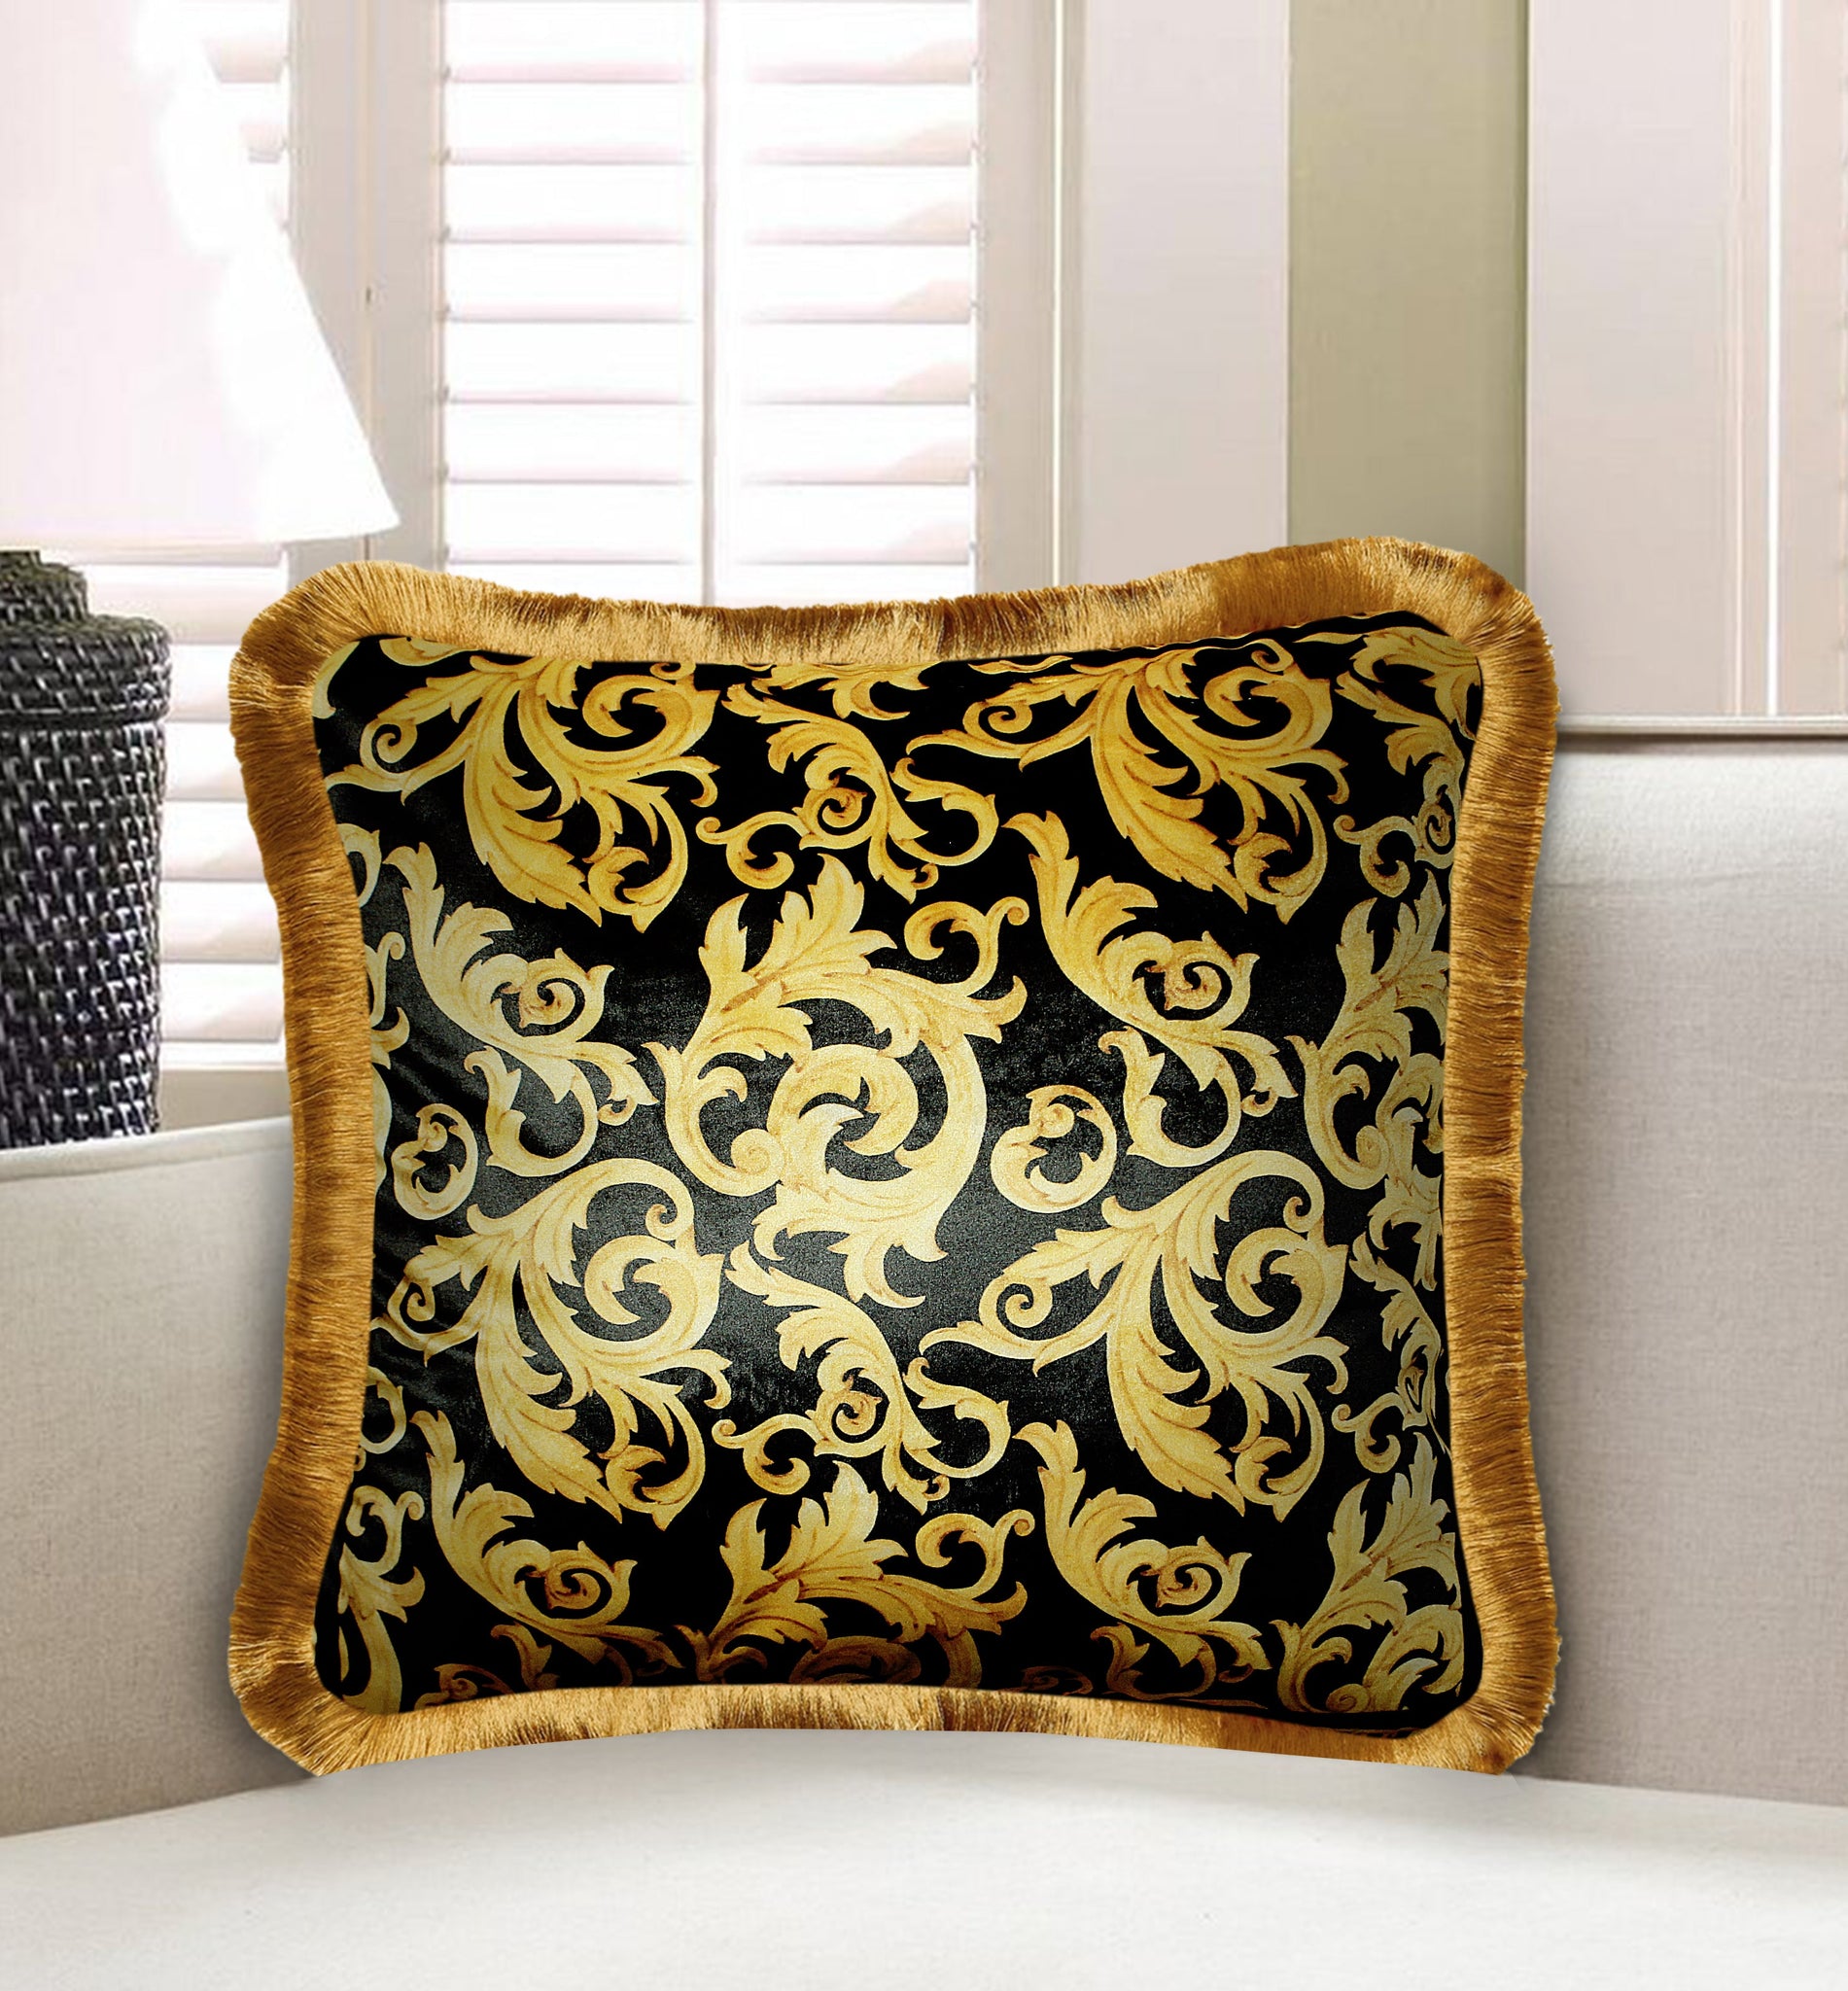  Velvet Cushion Cover Baroque Swirl Floral Decorative pillowcase Classic Motif Décor Throw Pillow for Sofa Chair Bedroom Living Room Black and Gold 45x45cm (18x18 Inches)